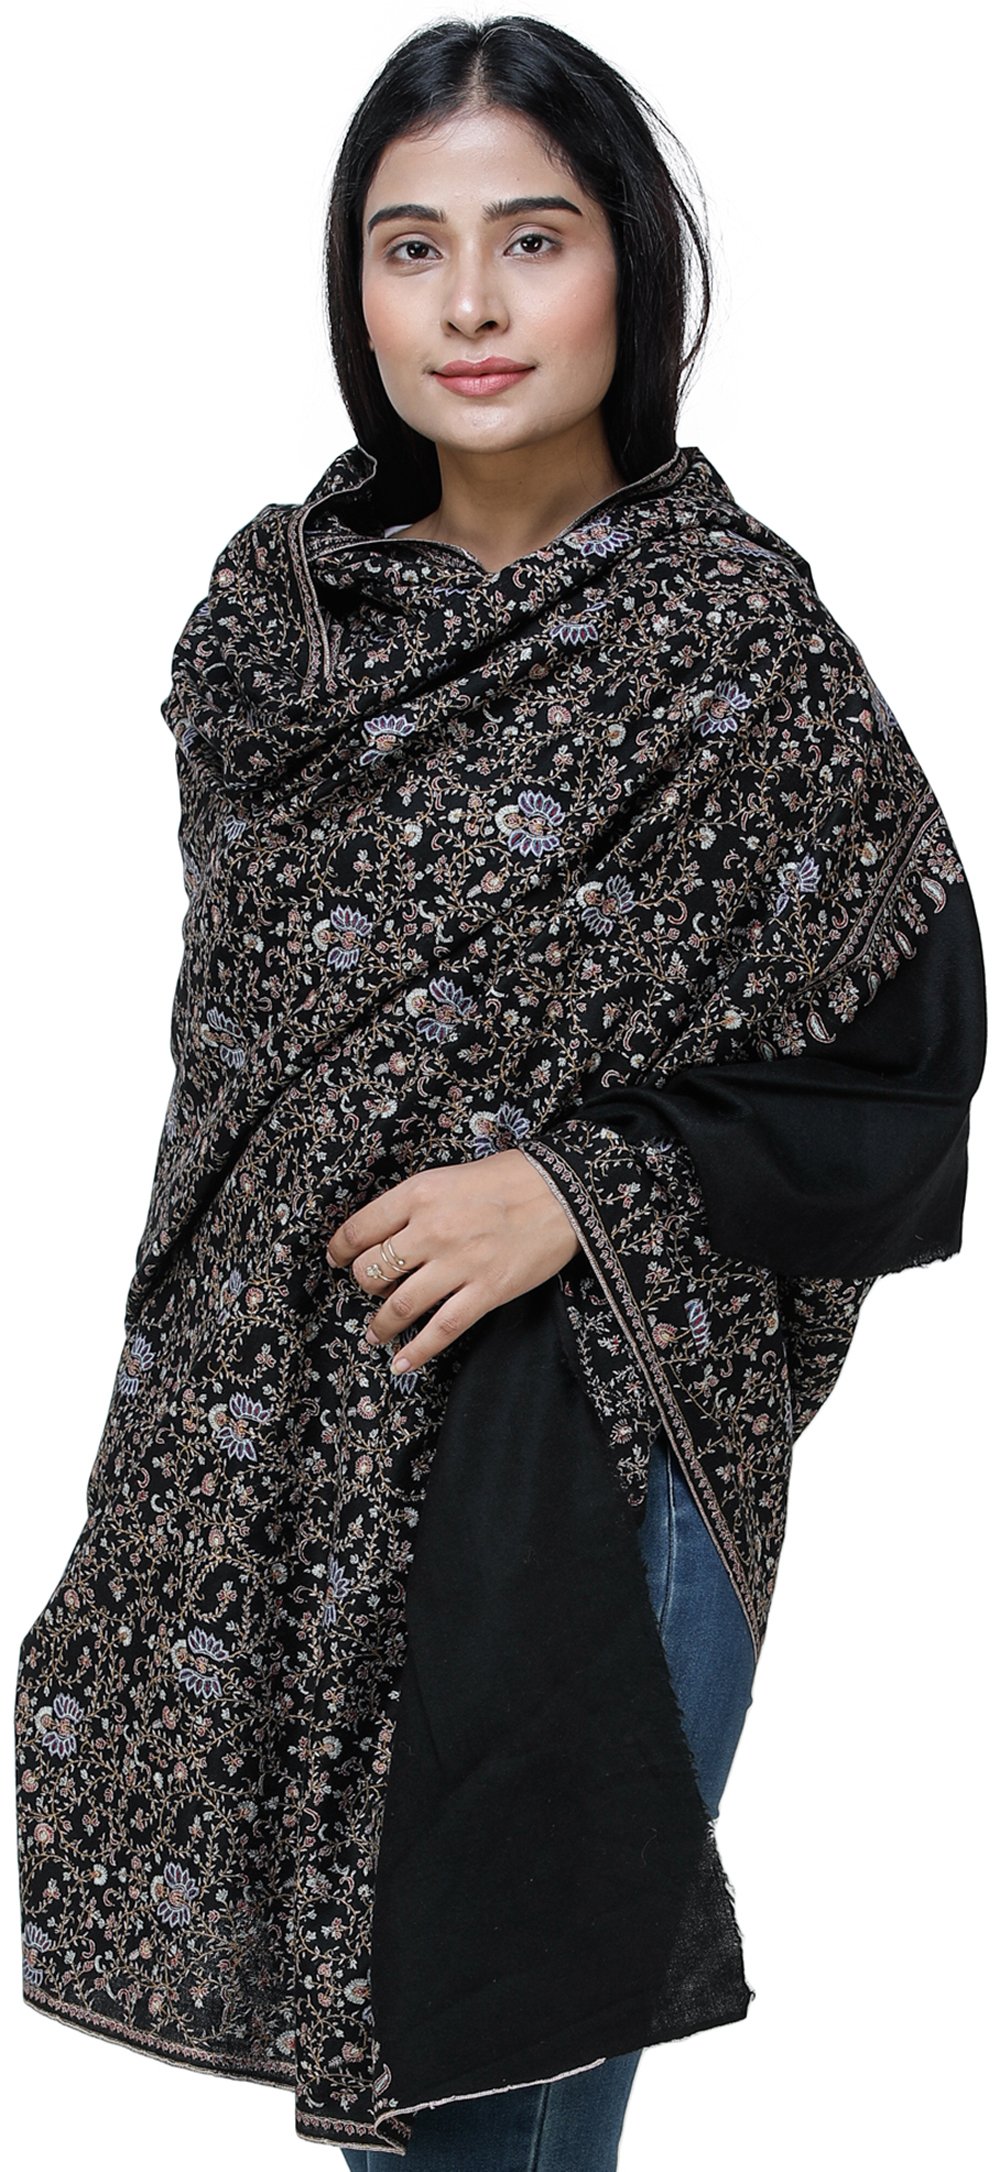 Jet-Black Pashmina Shawl From Kashmir with Intricate Needle Embroidery ...